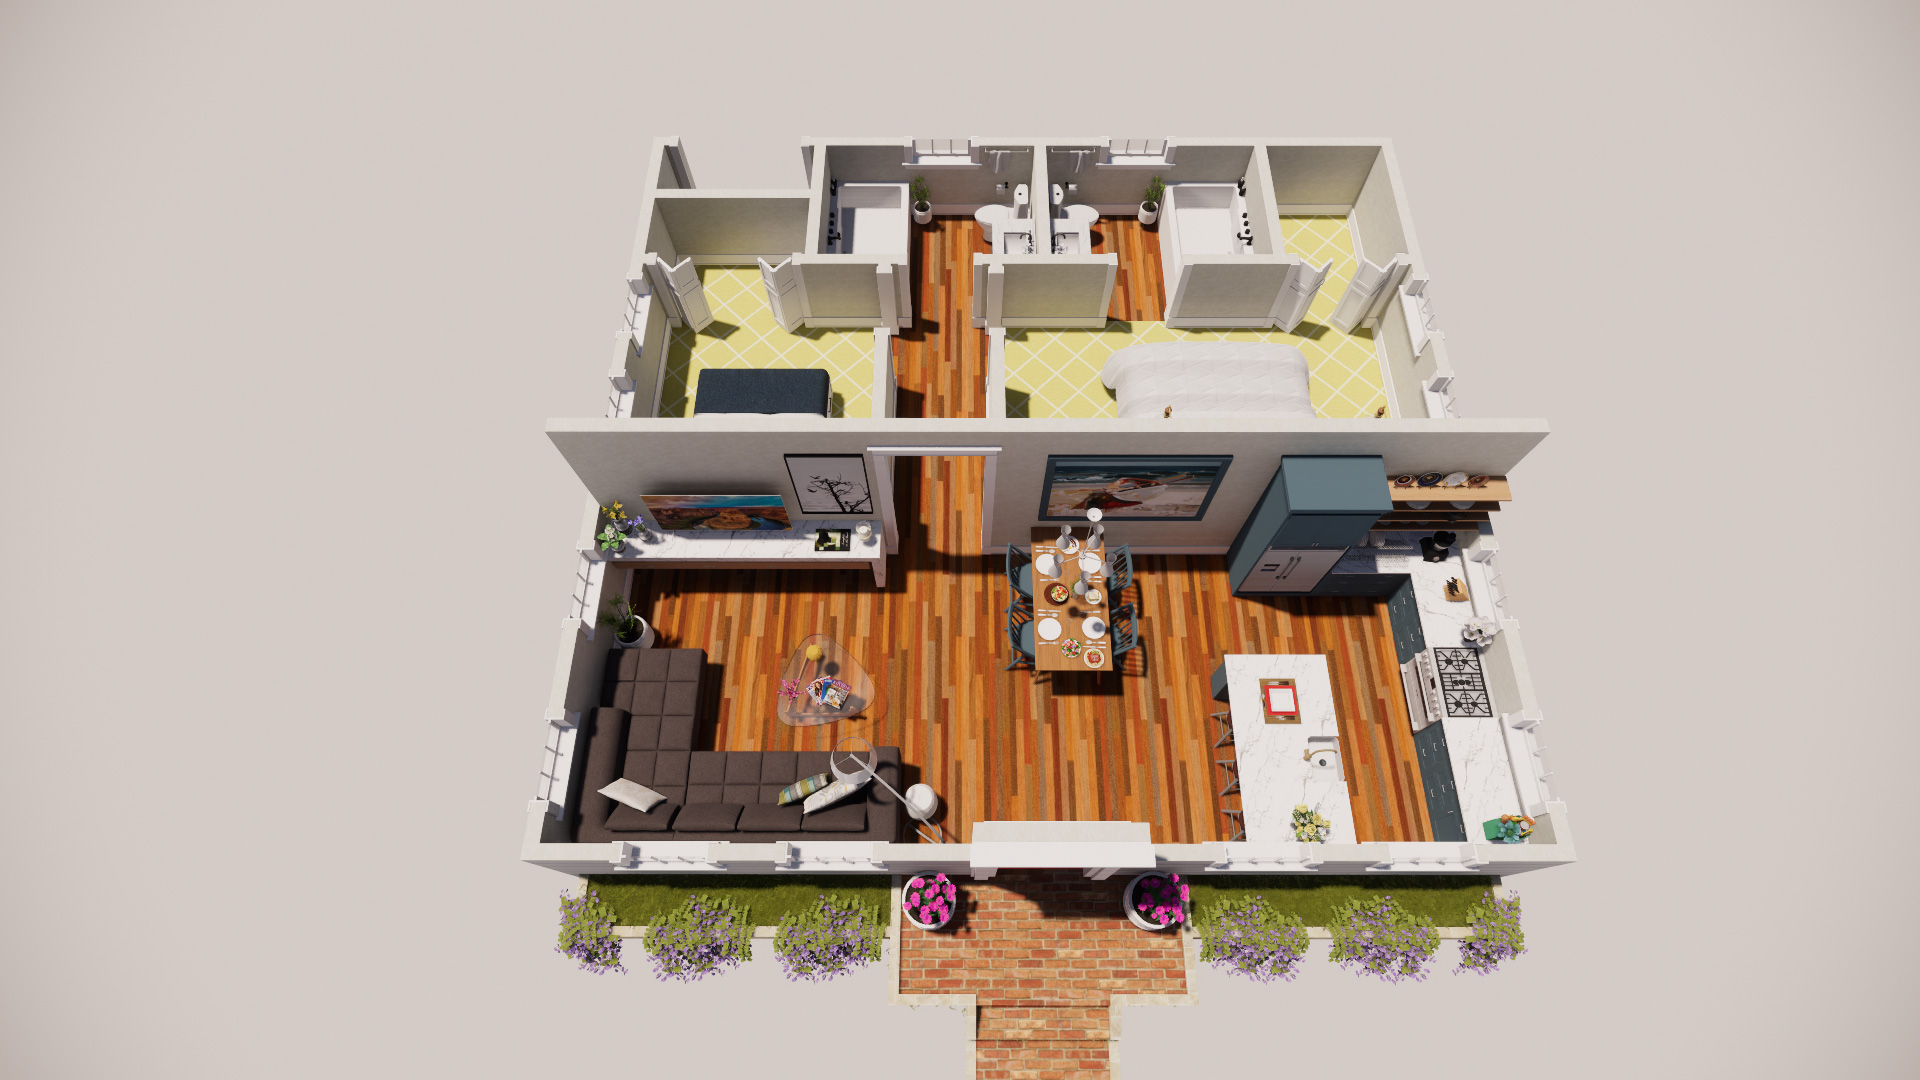 Floorplan of house, with kitchen and living area in foreground and two bedrooms and bathrooms in back.